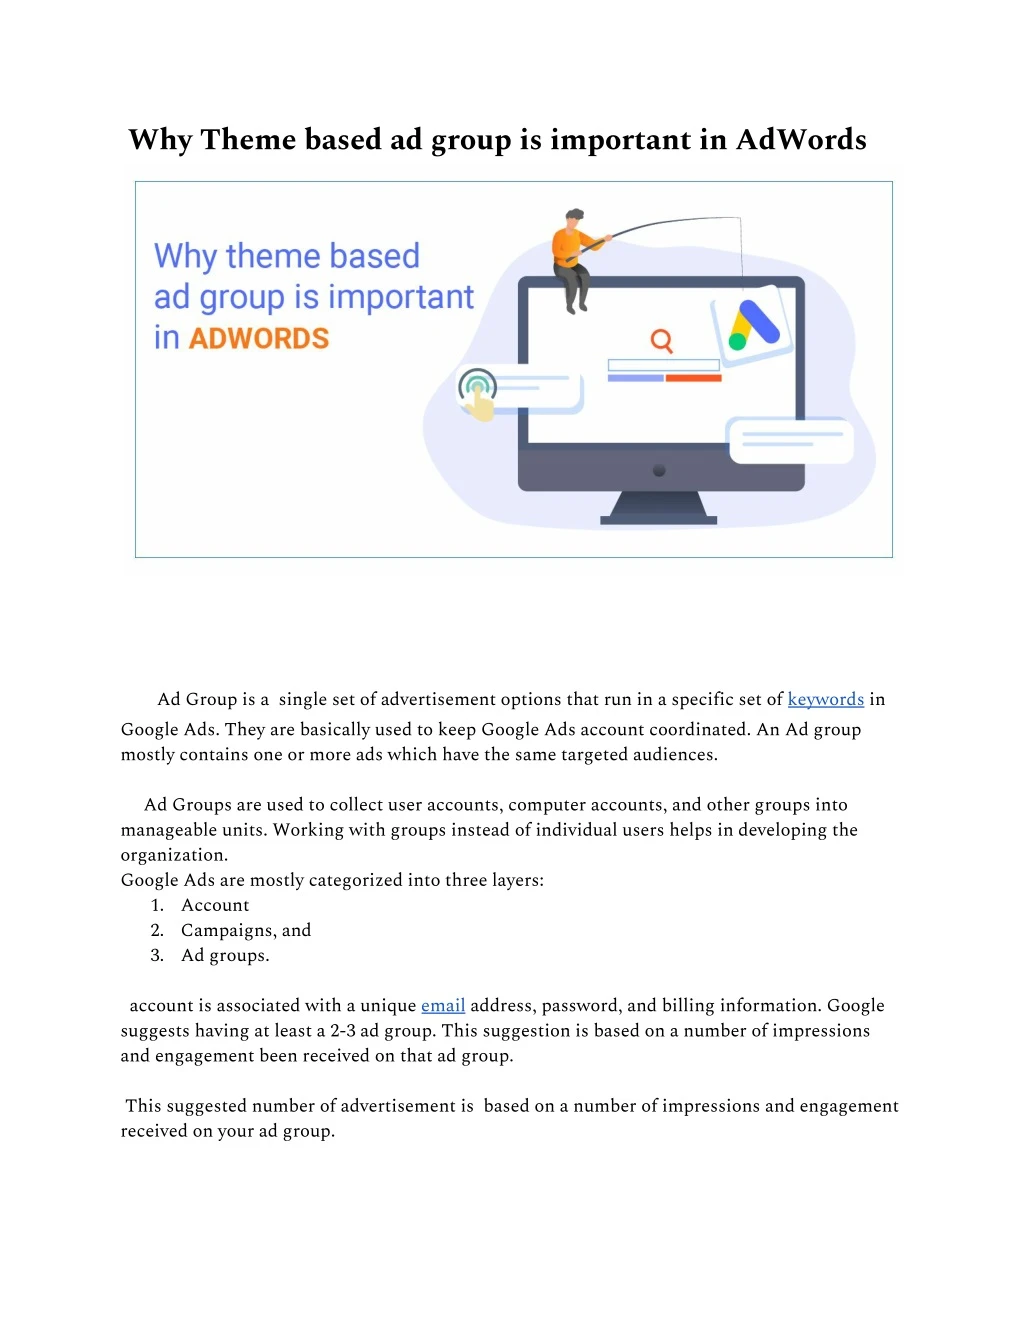 why theme based ad group is important in adwords